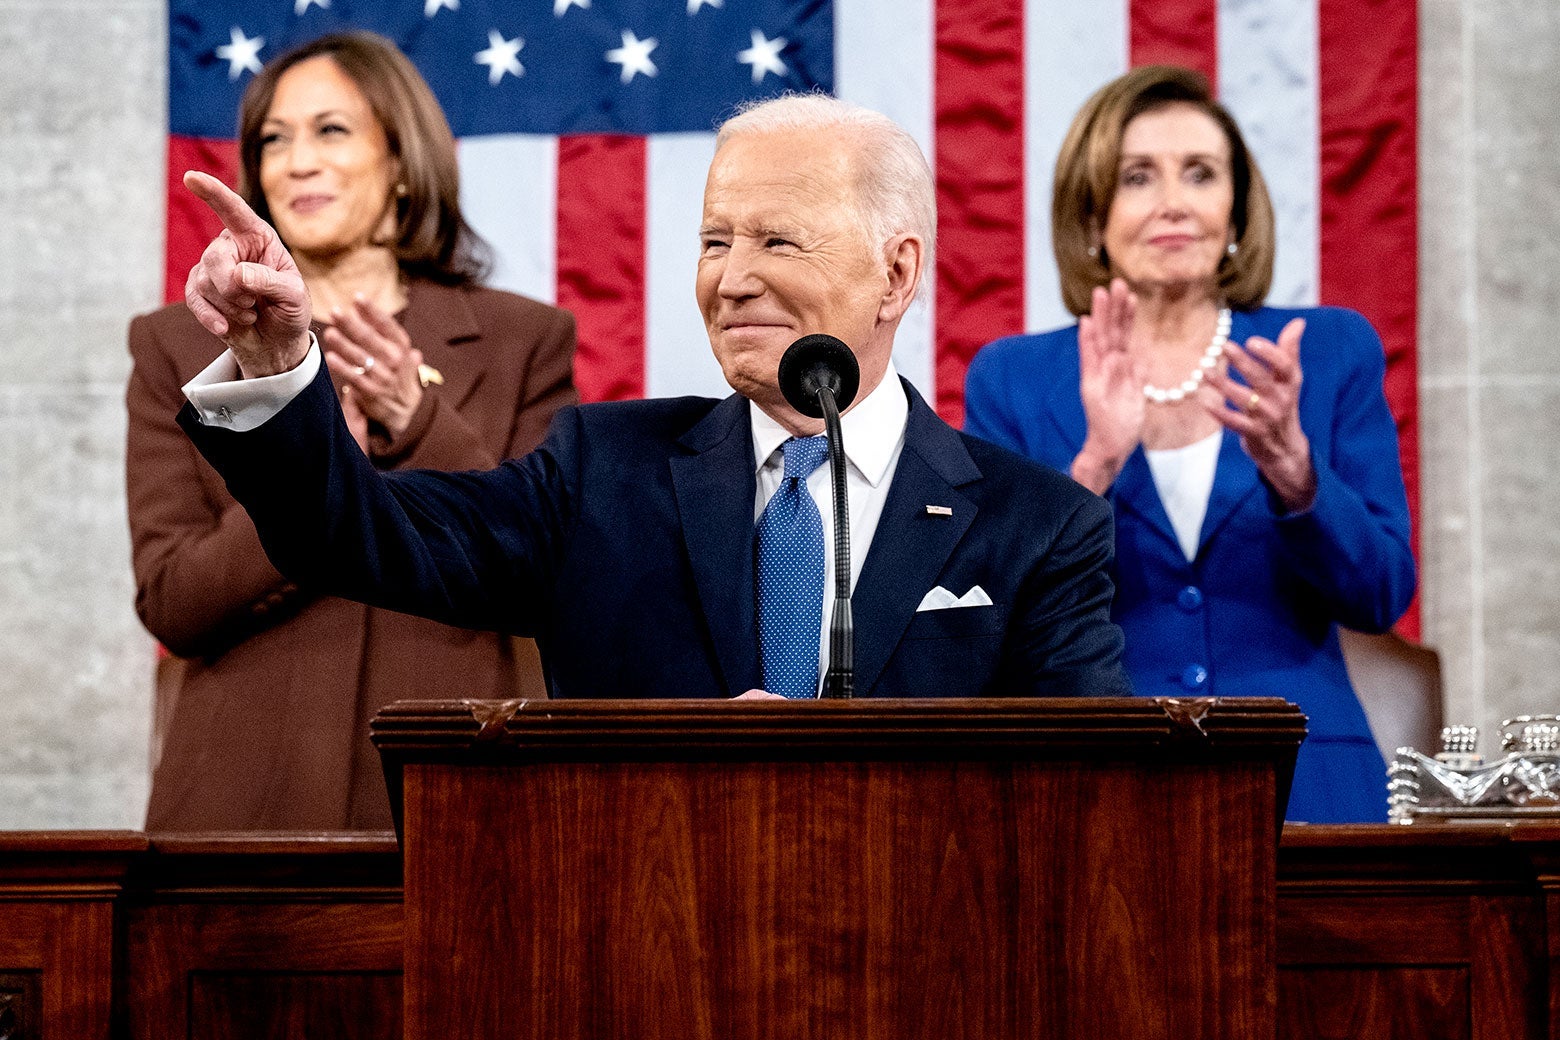 Biden smiling and pointing into the crowd during the State of the Union address as Kamala Harris and Nancy Pelosi clap behind him